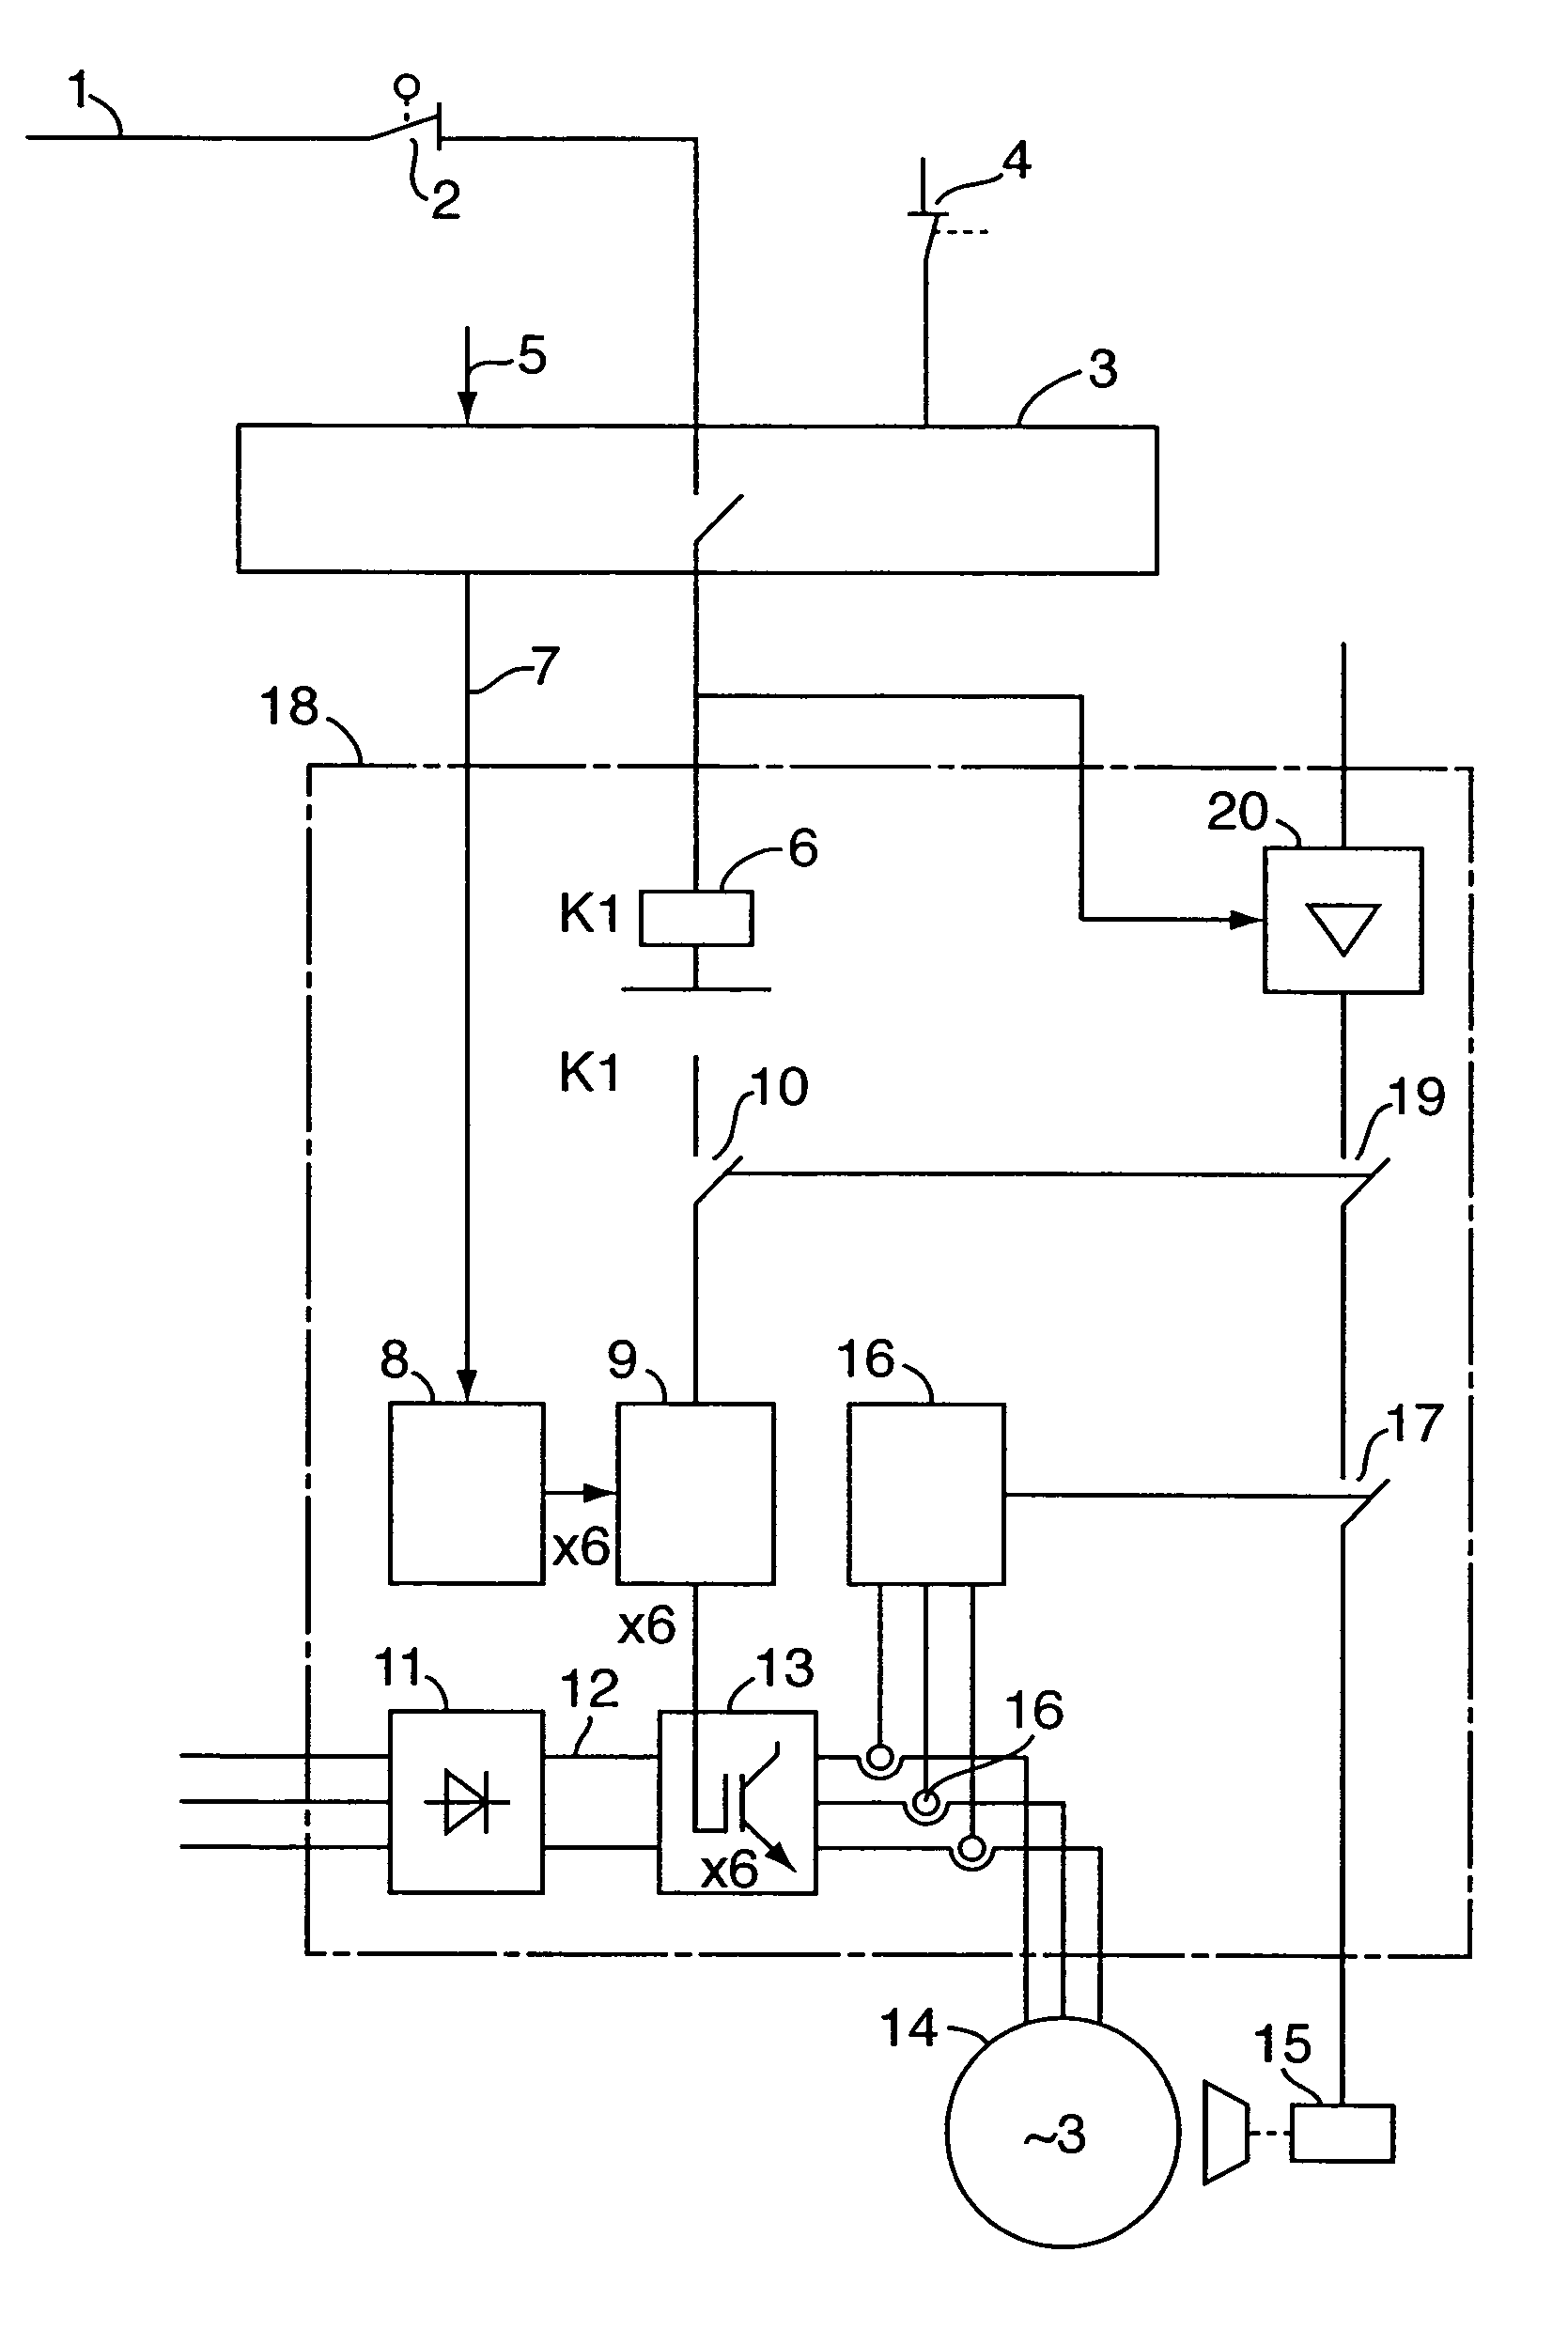 Method and system for stopping elevators